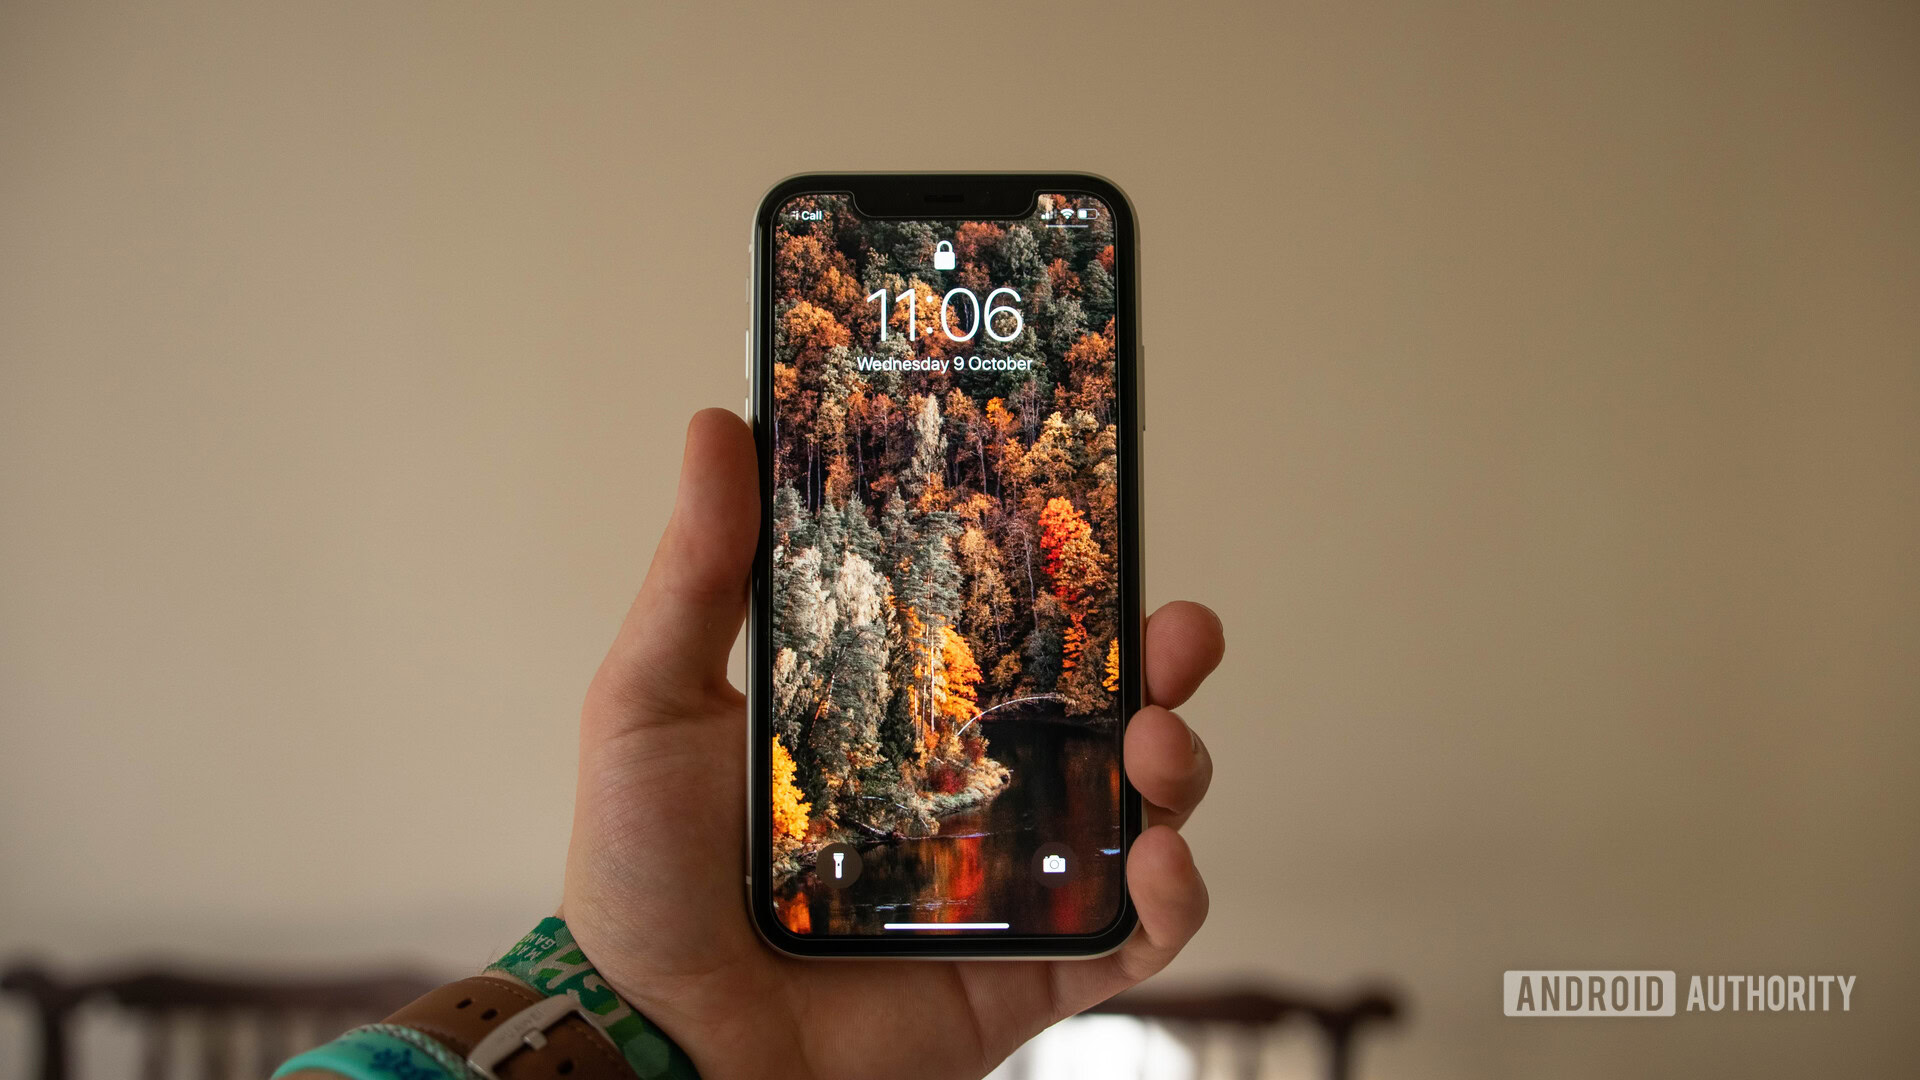 Apple iPhone 11 review: Apple finally takes affordable flagships seriously